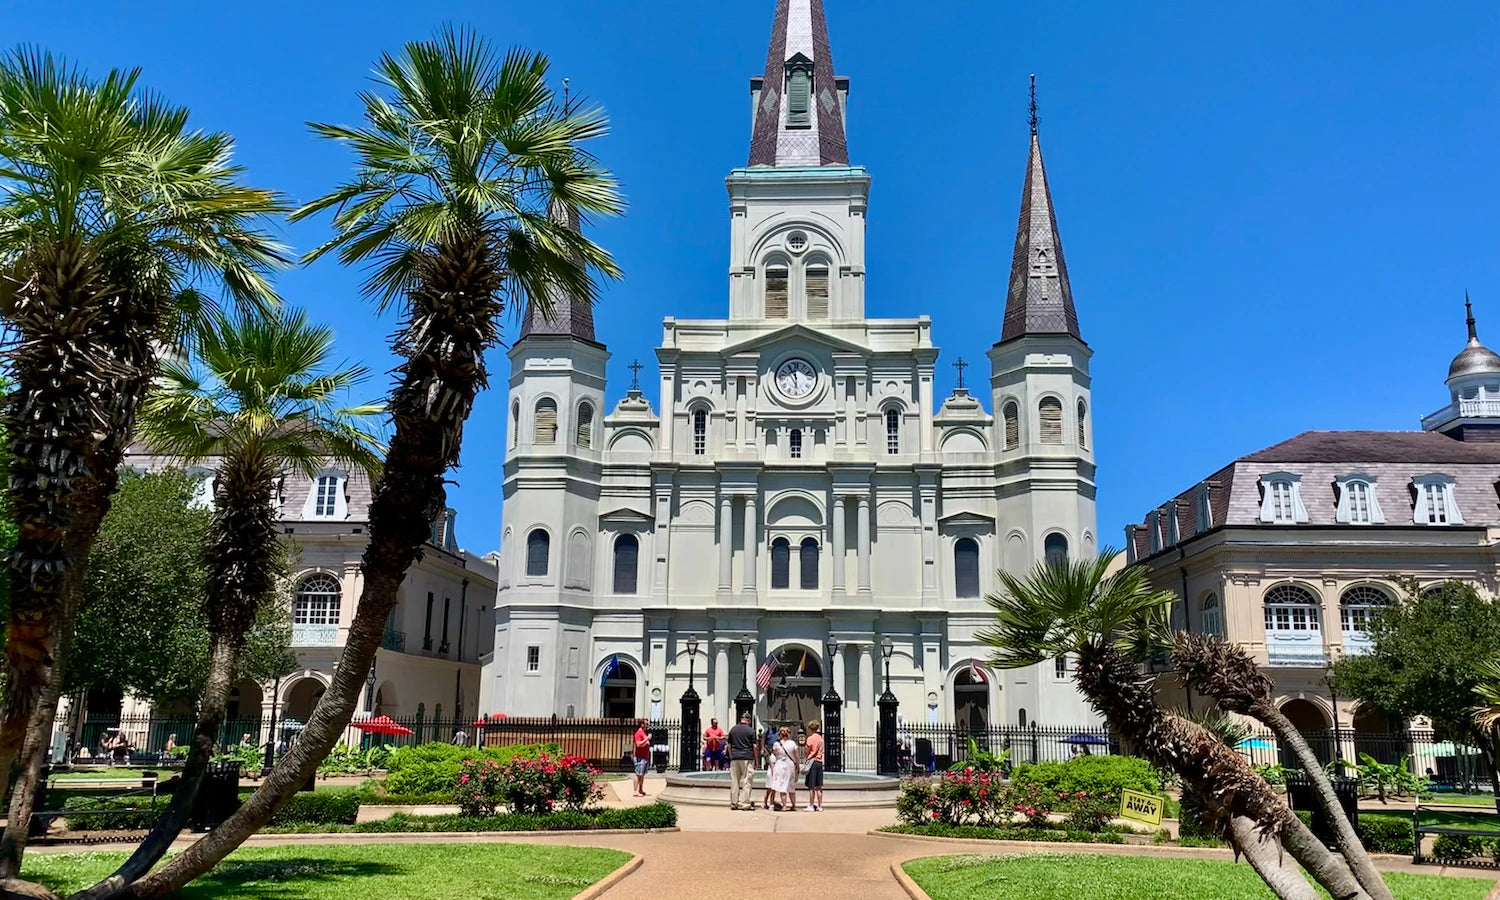 New Orleans - The Big Easy